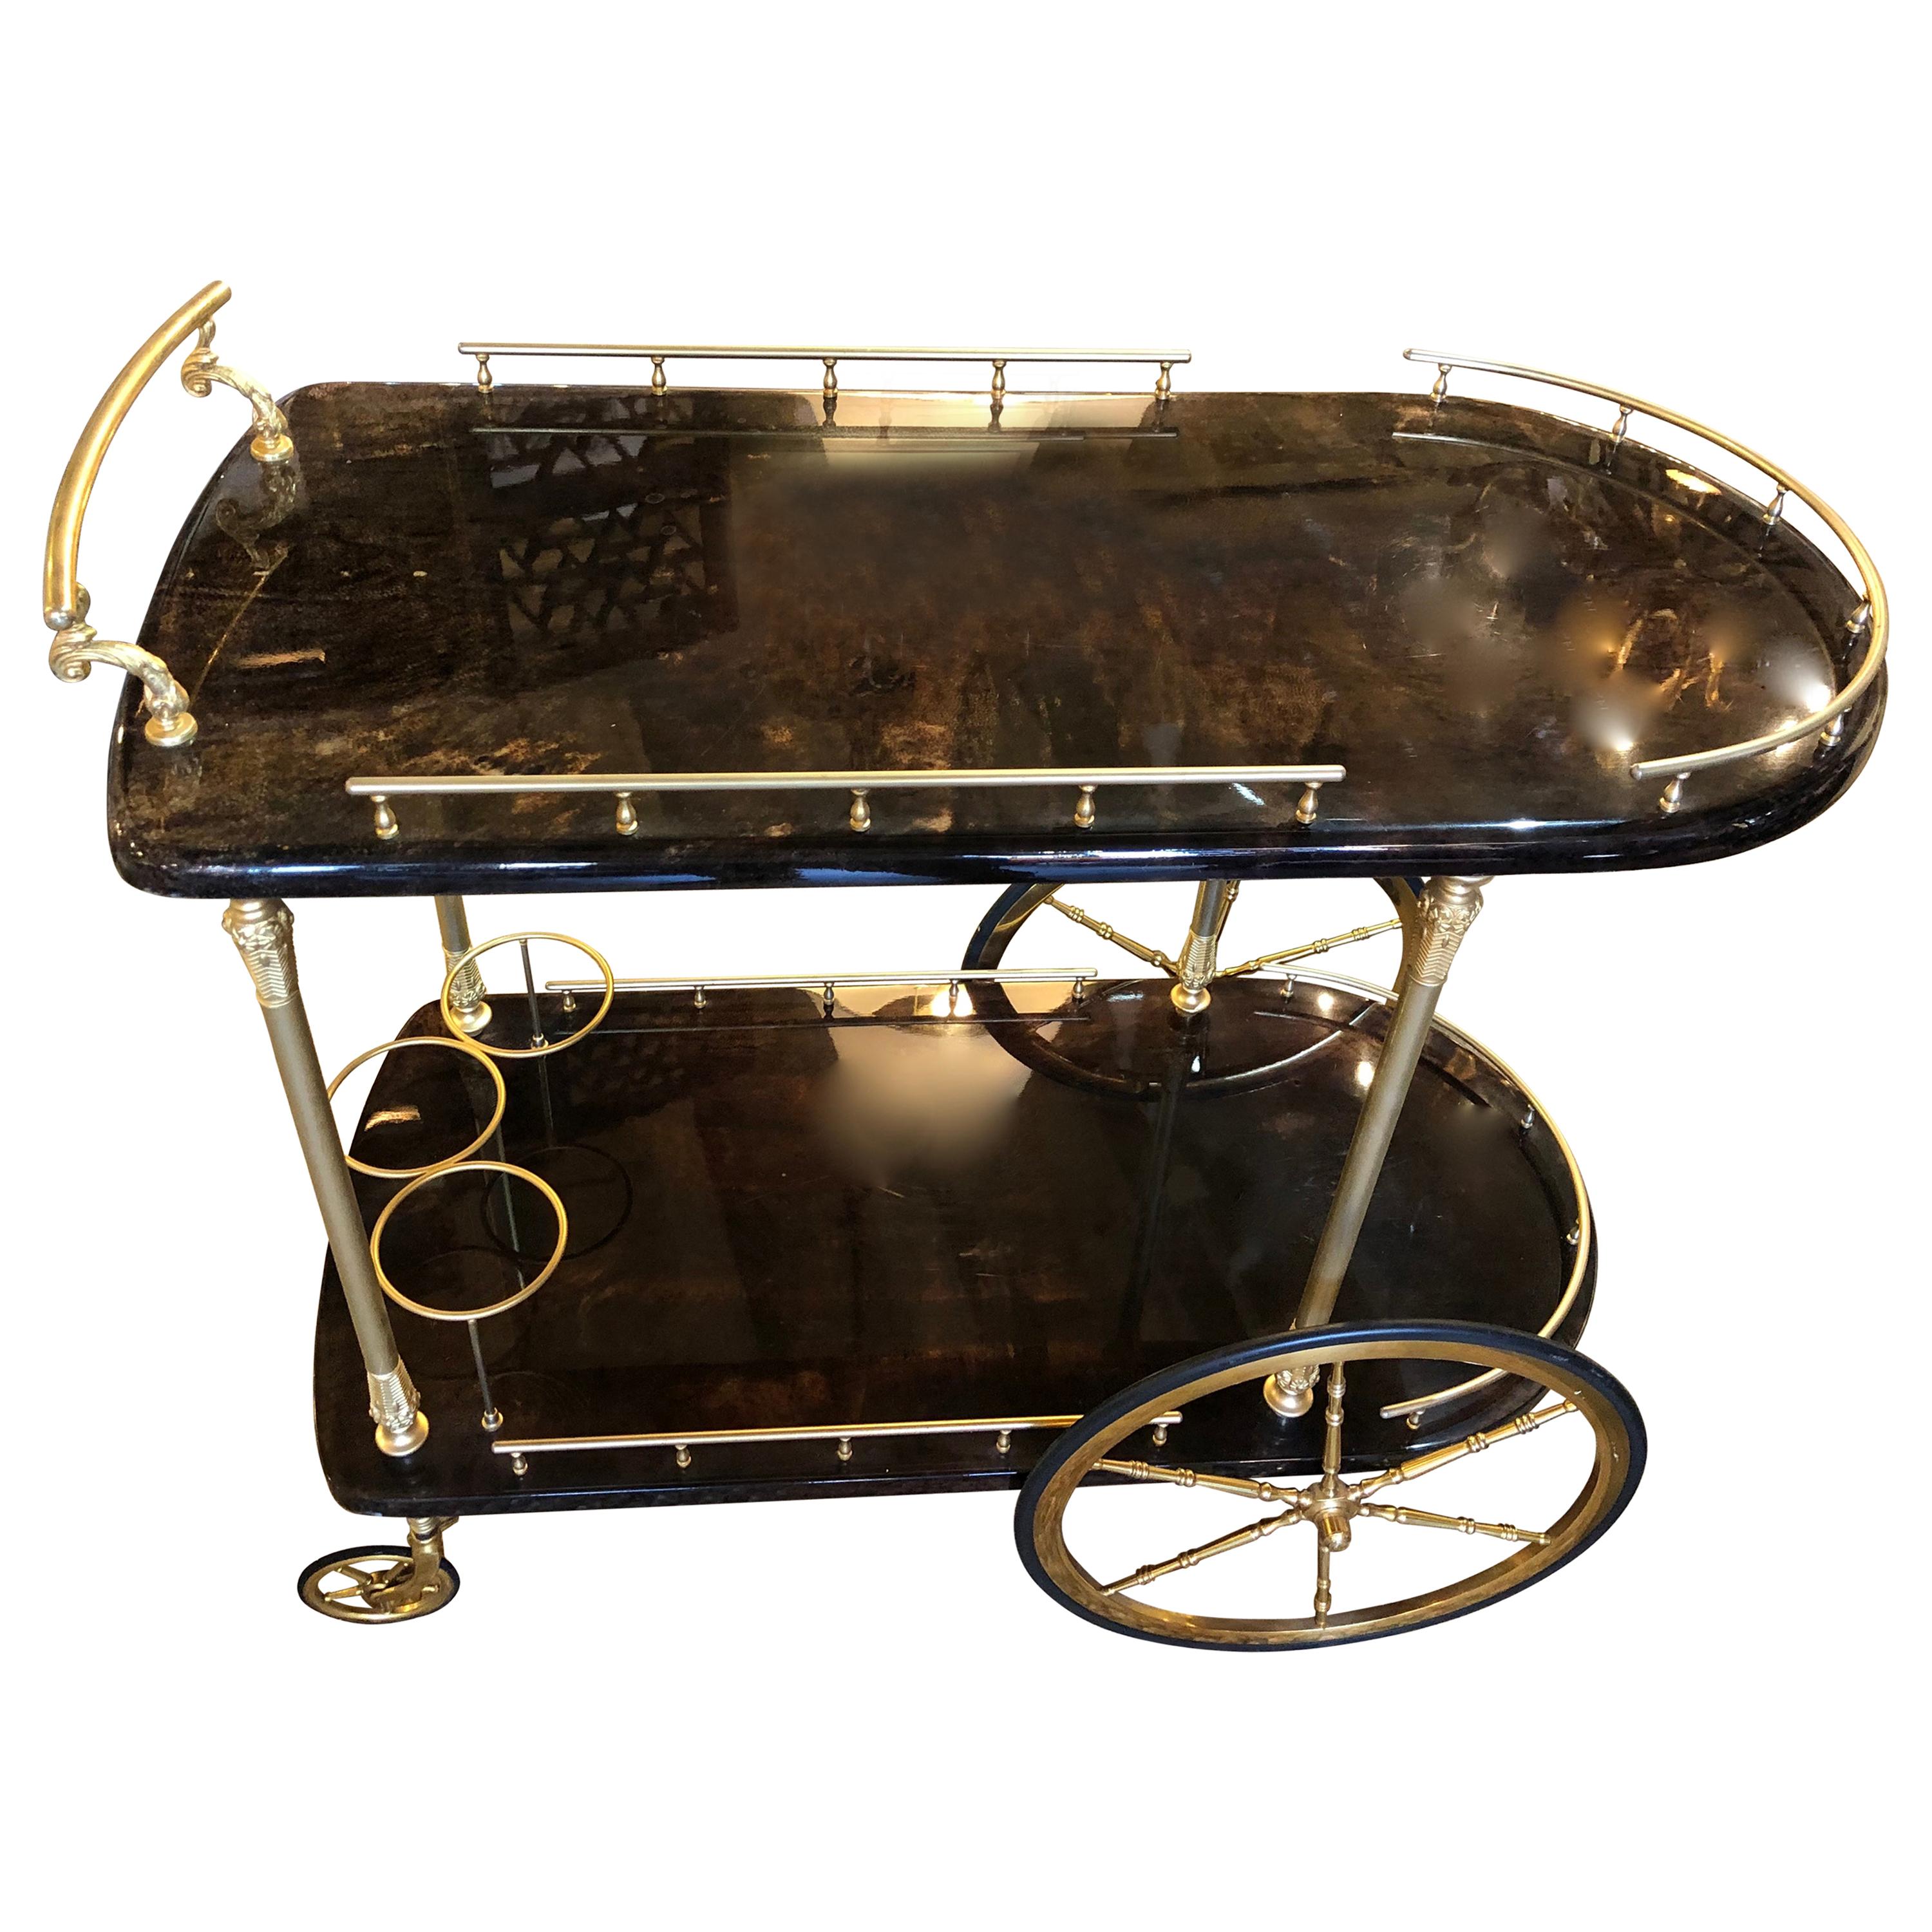 Vintage Aldo Tura Lacquered Goatskin Bar Cart with Gilt Brass Accents